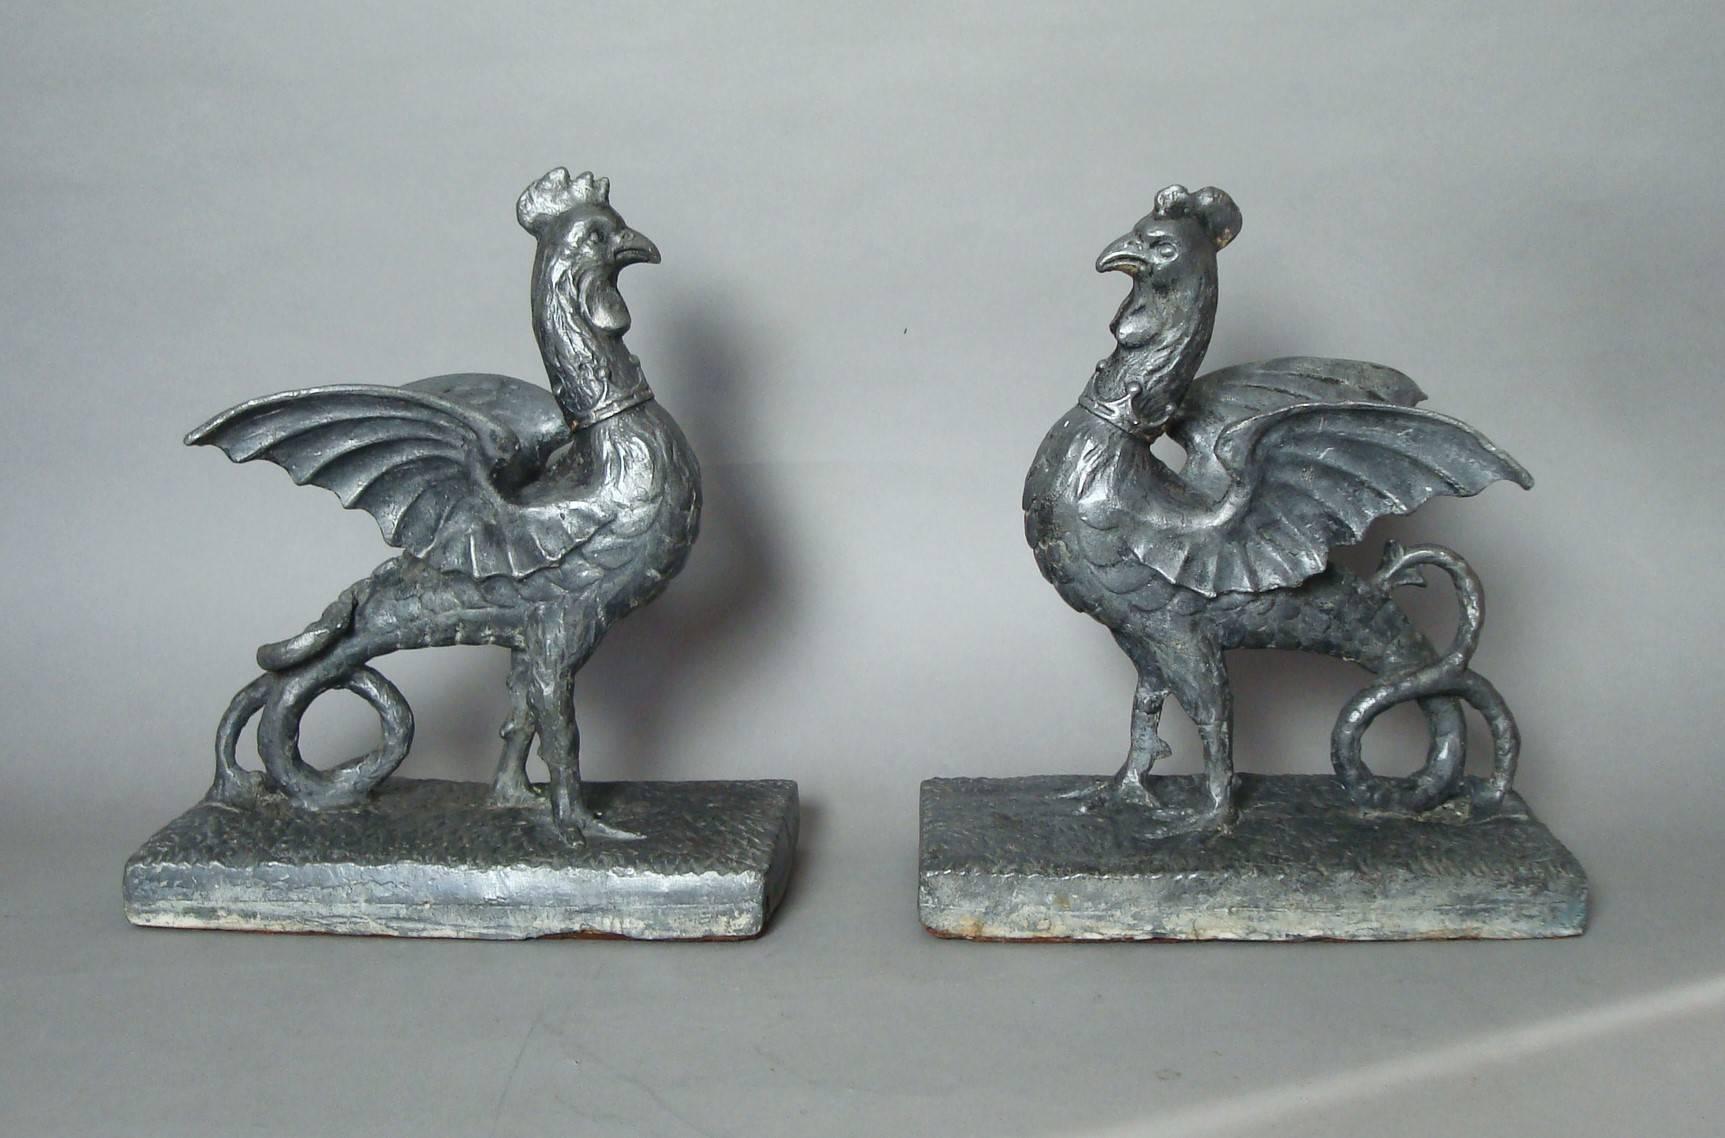 Rare 18th century pair of lead Cockertrice "Heraldic Cockerels", poised in an alert stance, and very unusually wearing a coronet around their necks, presumably made for a royal or titled family standing on a naturalistic plinth base, with